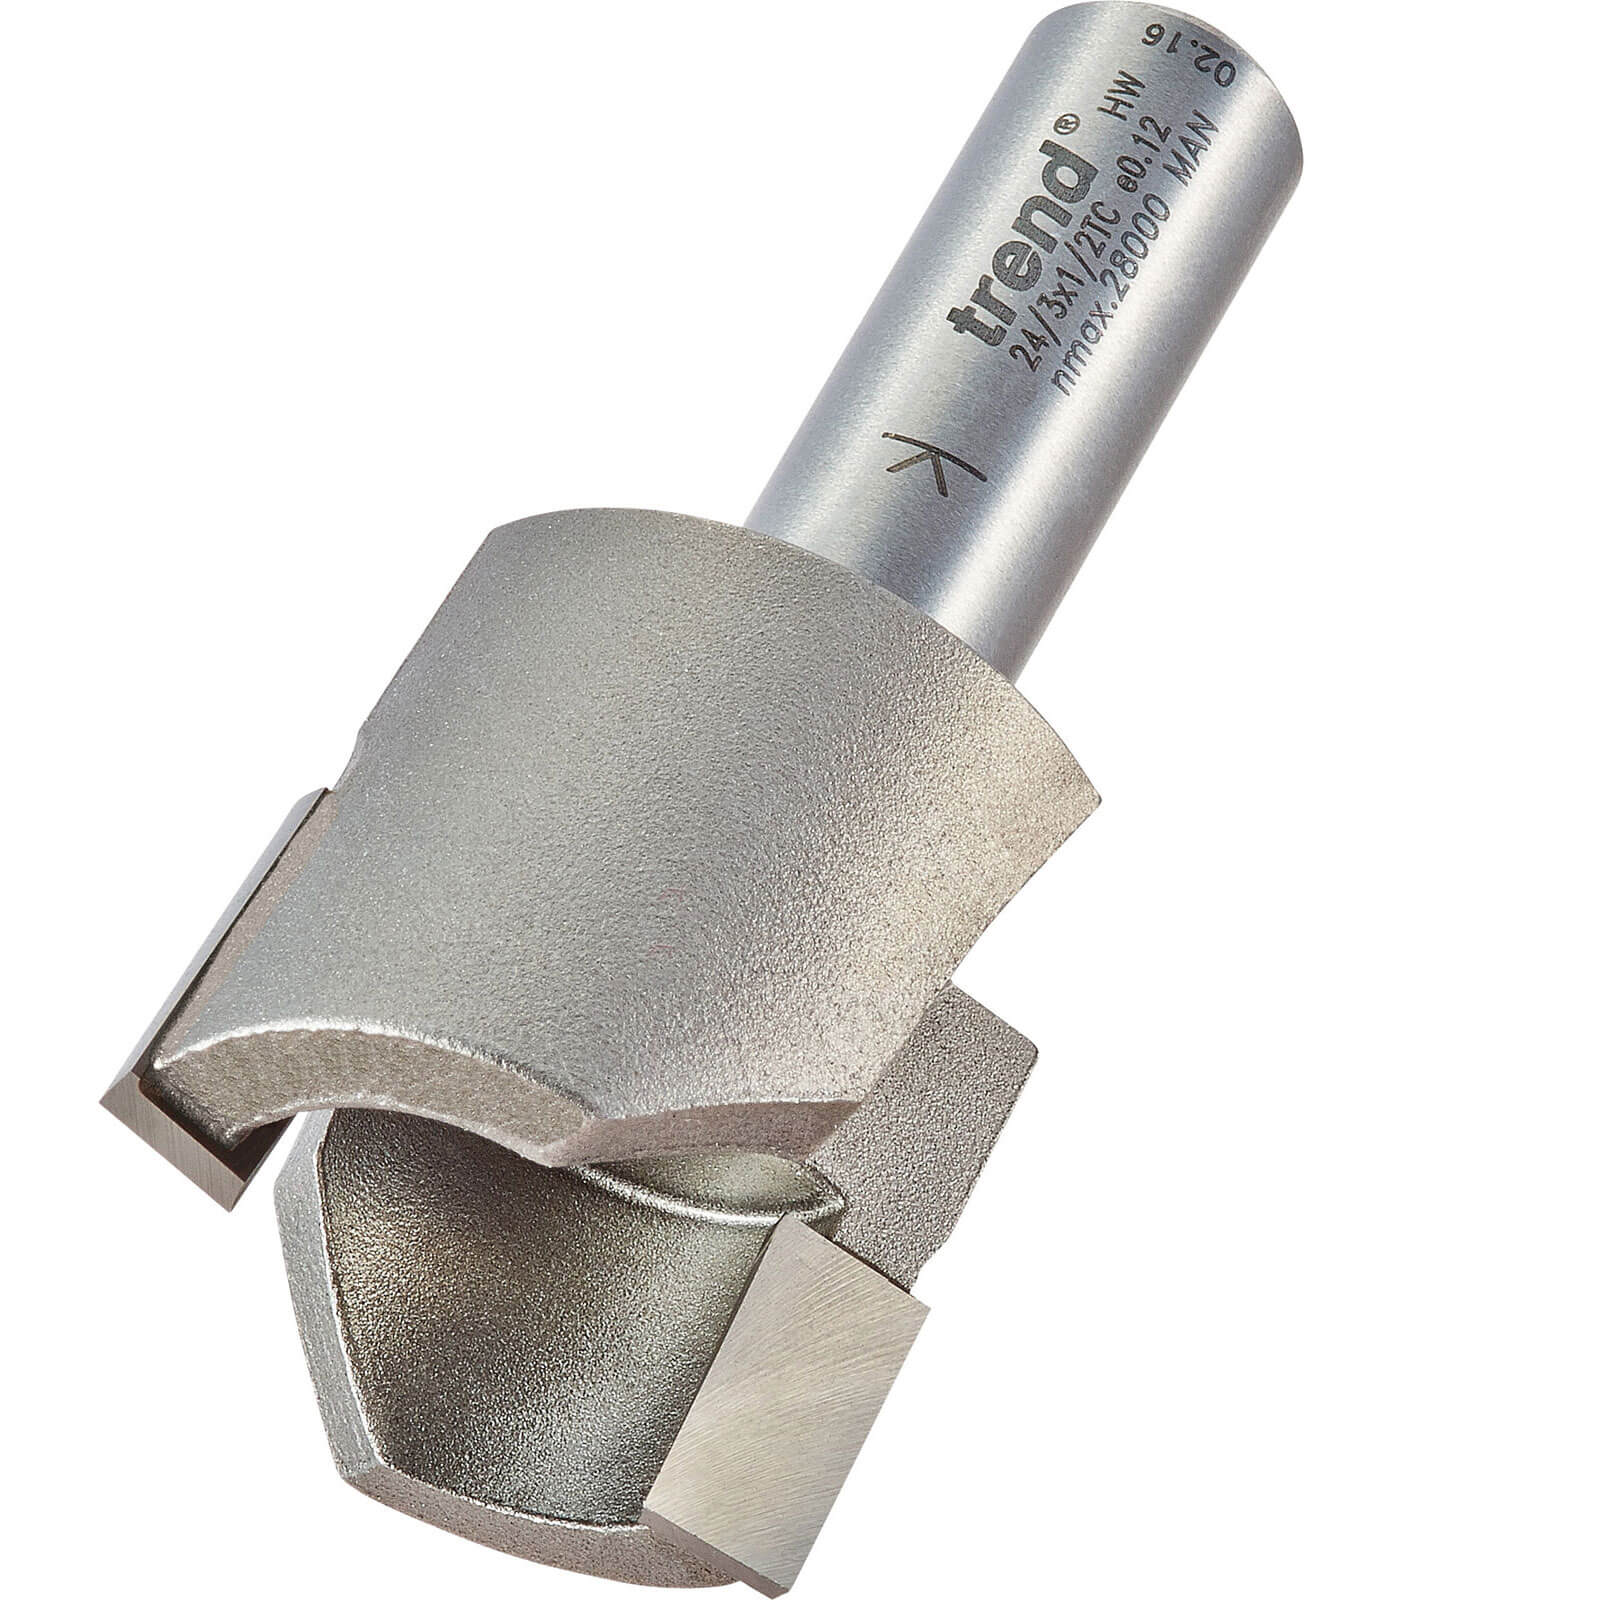 Photo of Trend Tct Tapered Plug Cutter 19.1mm 1/2